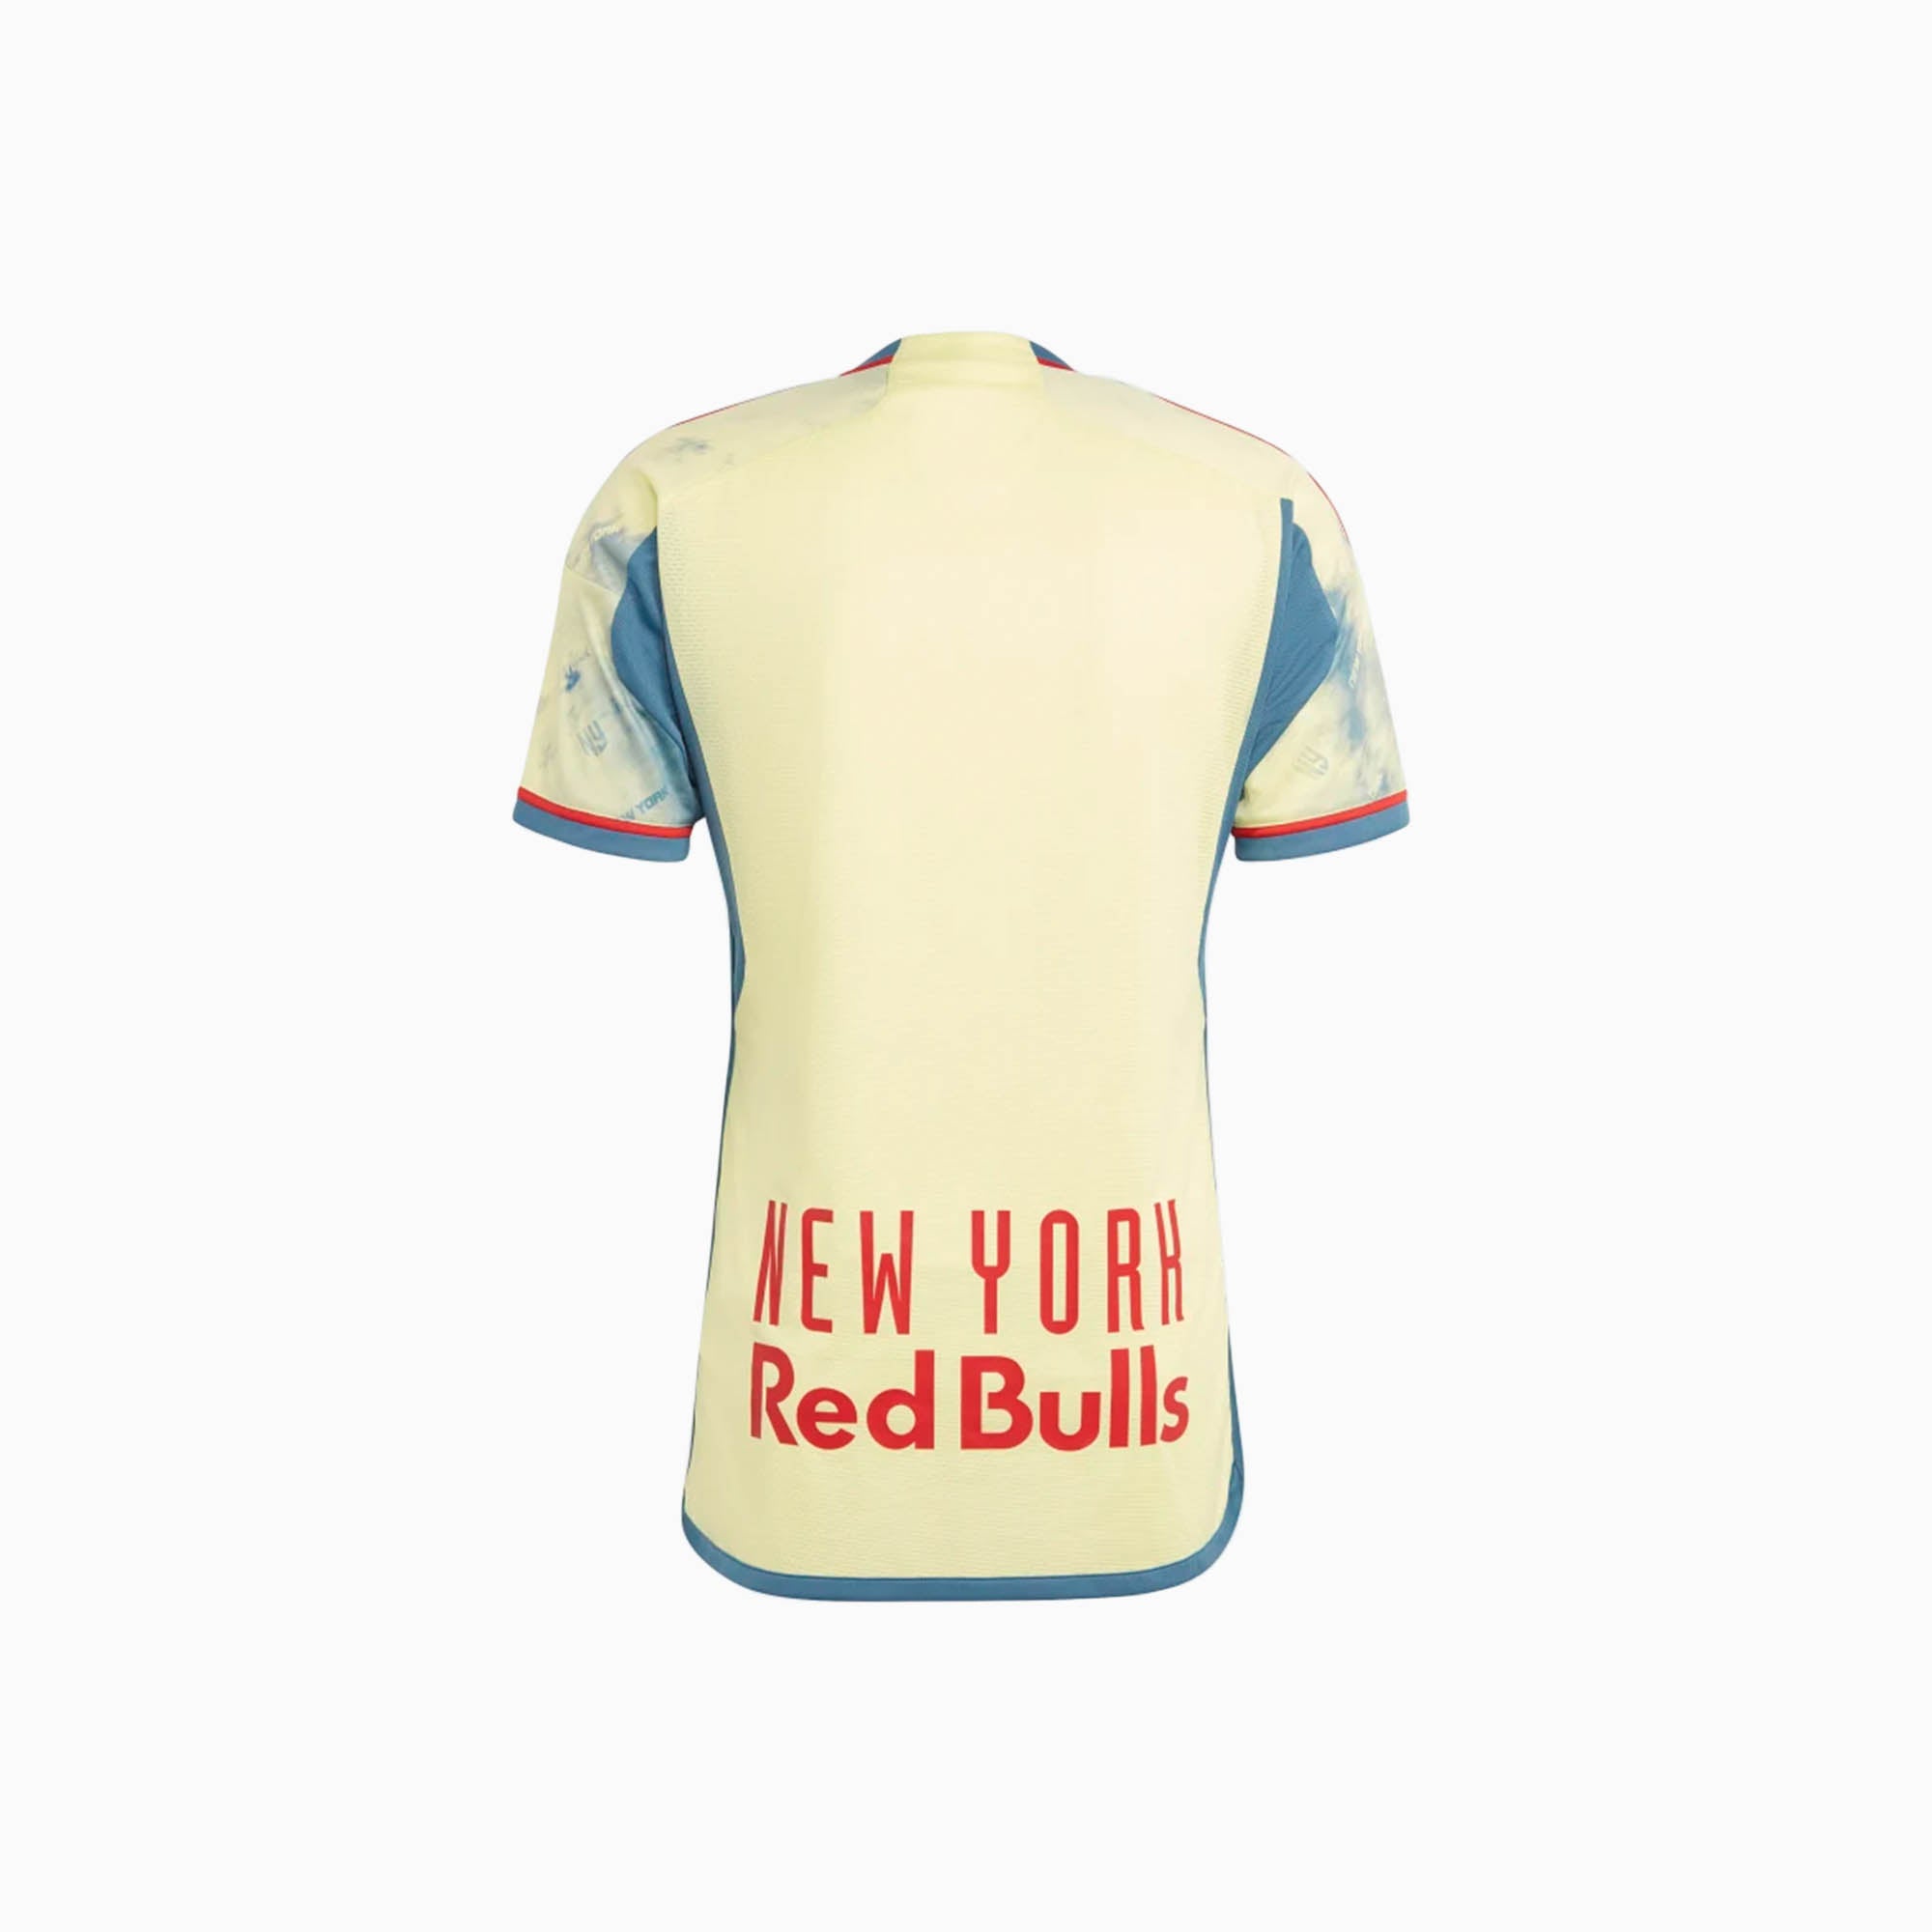 DP x New York Red Bulls authentic jersey / yellow